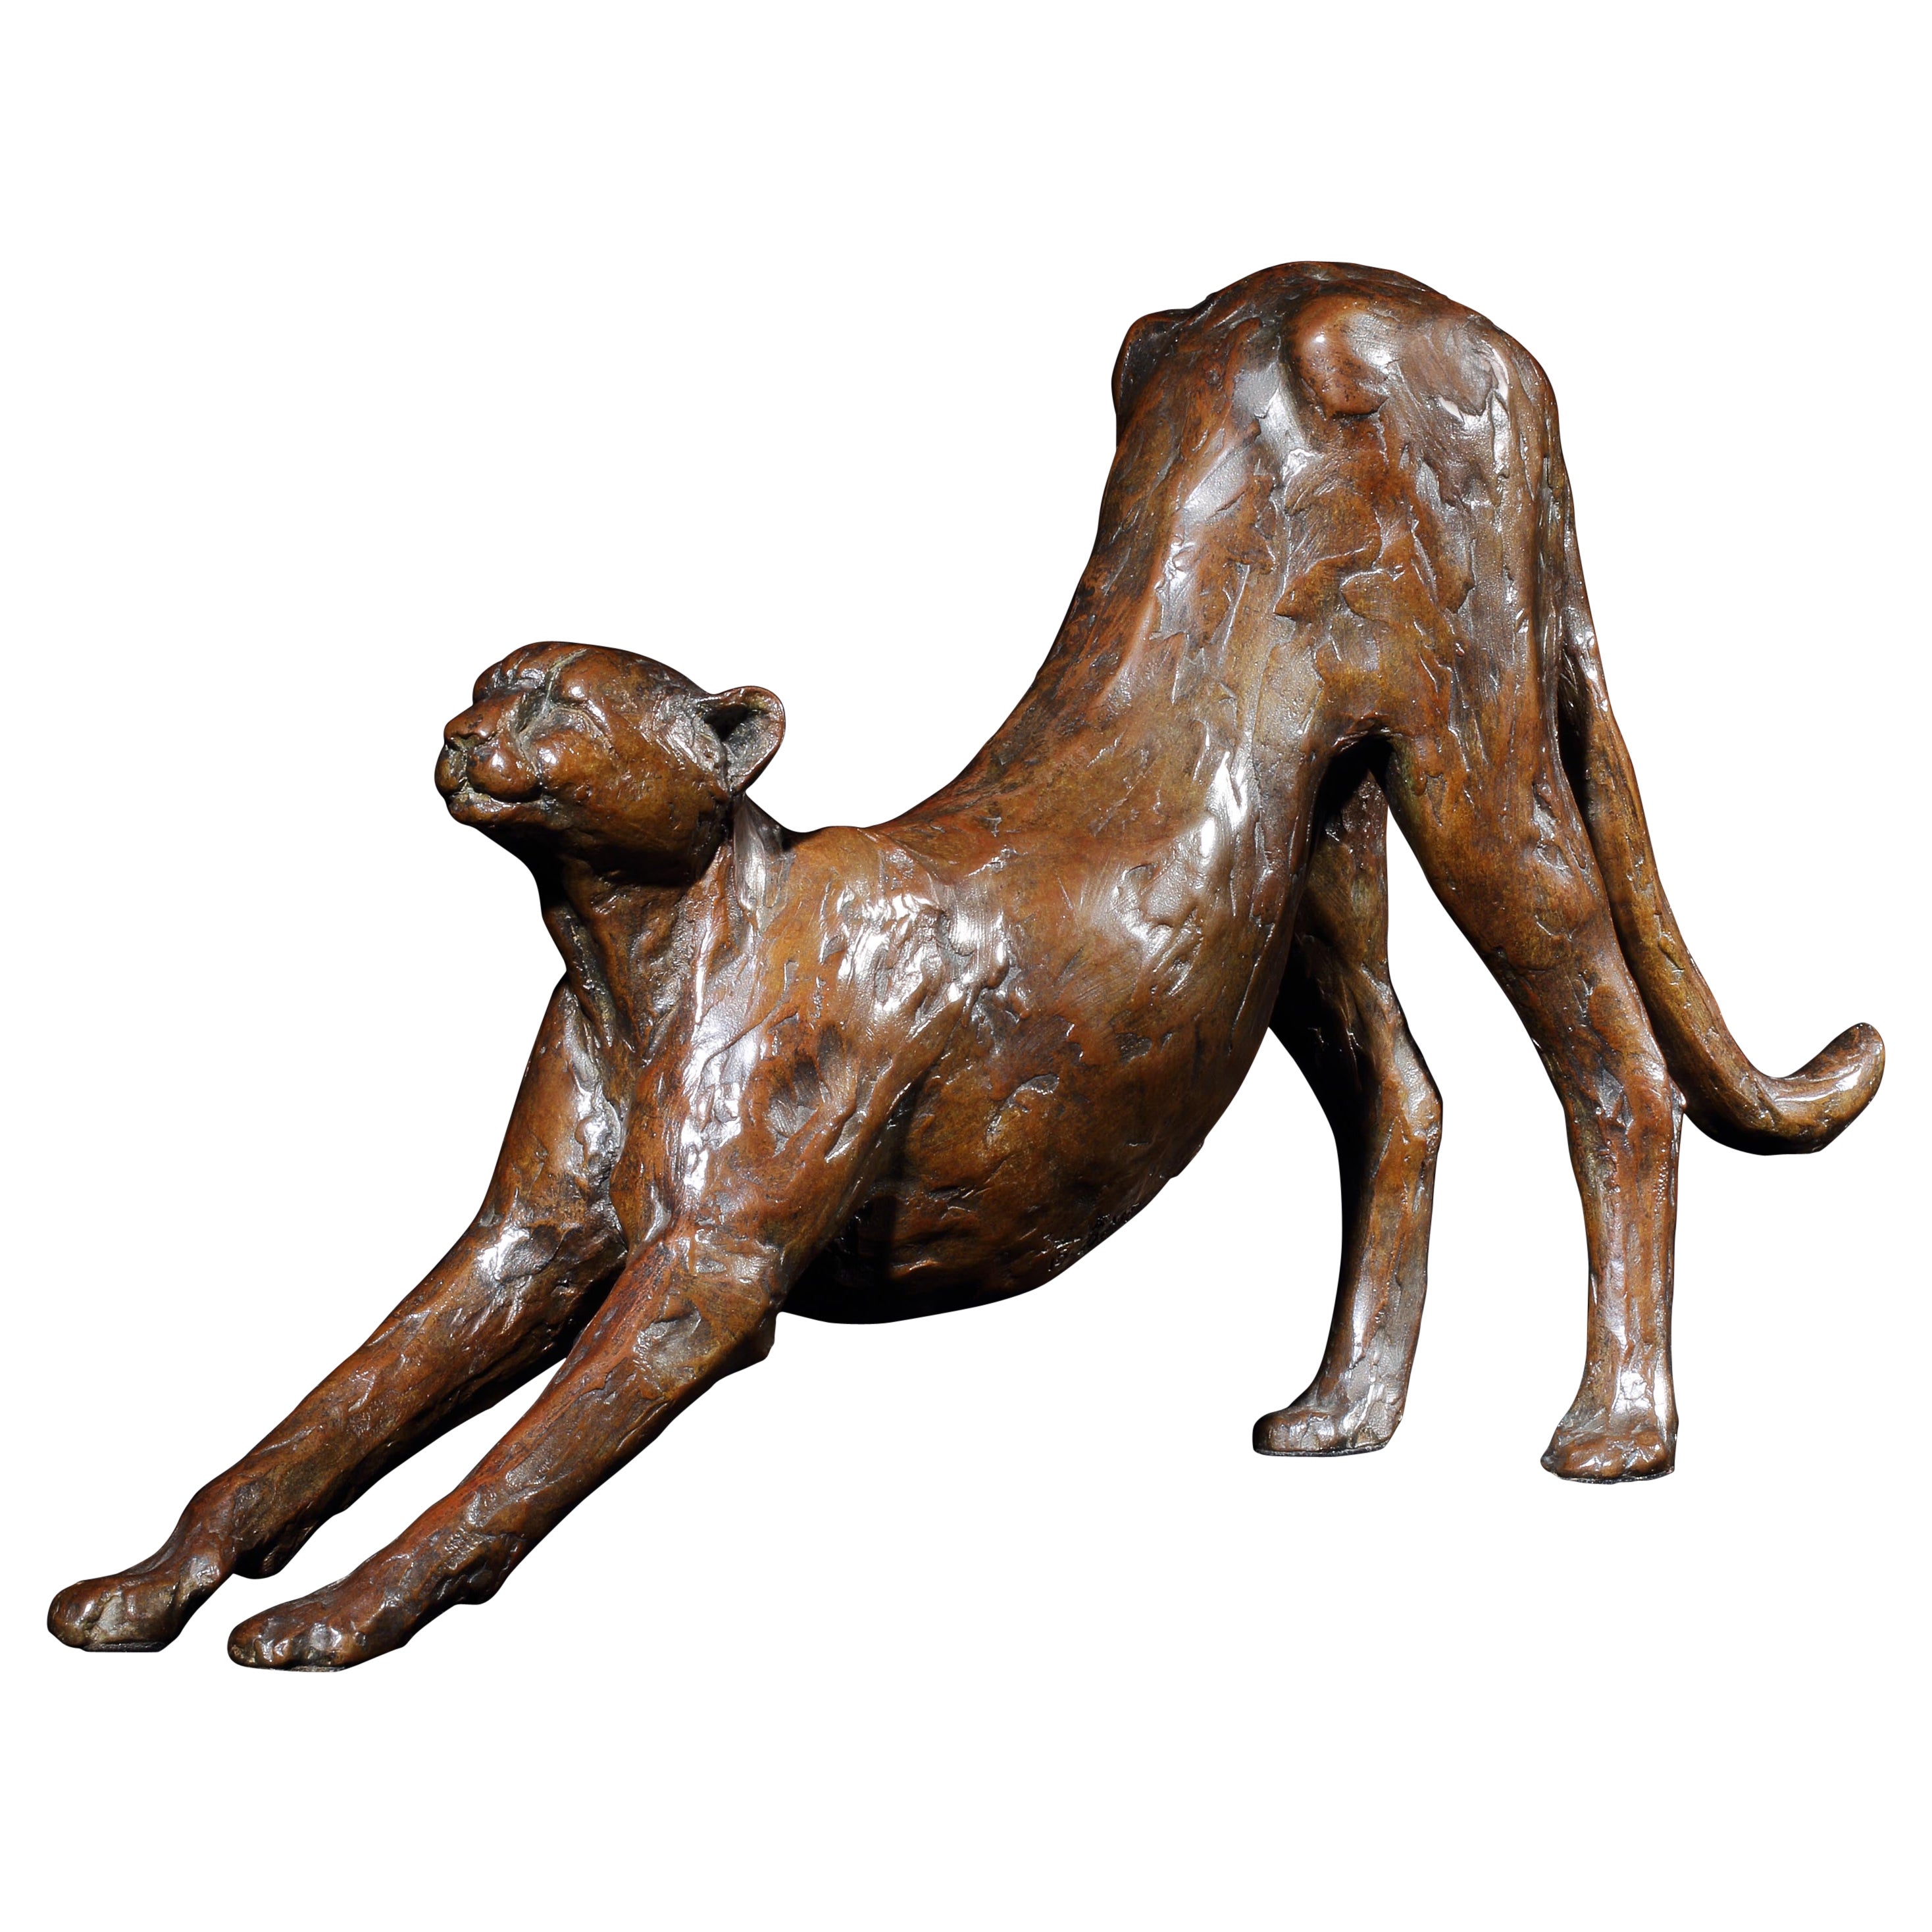 Cheetah Stretching Ingwe FoundryS31 Bronze Sculpture Maquette 3/15 Monogram BMR  For Sale